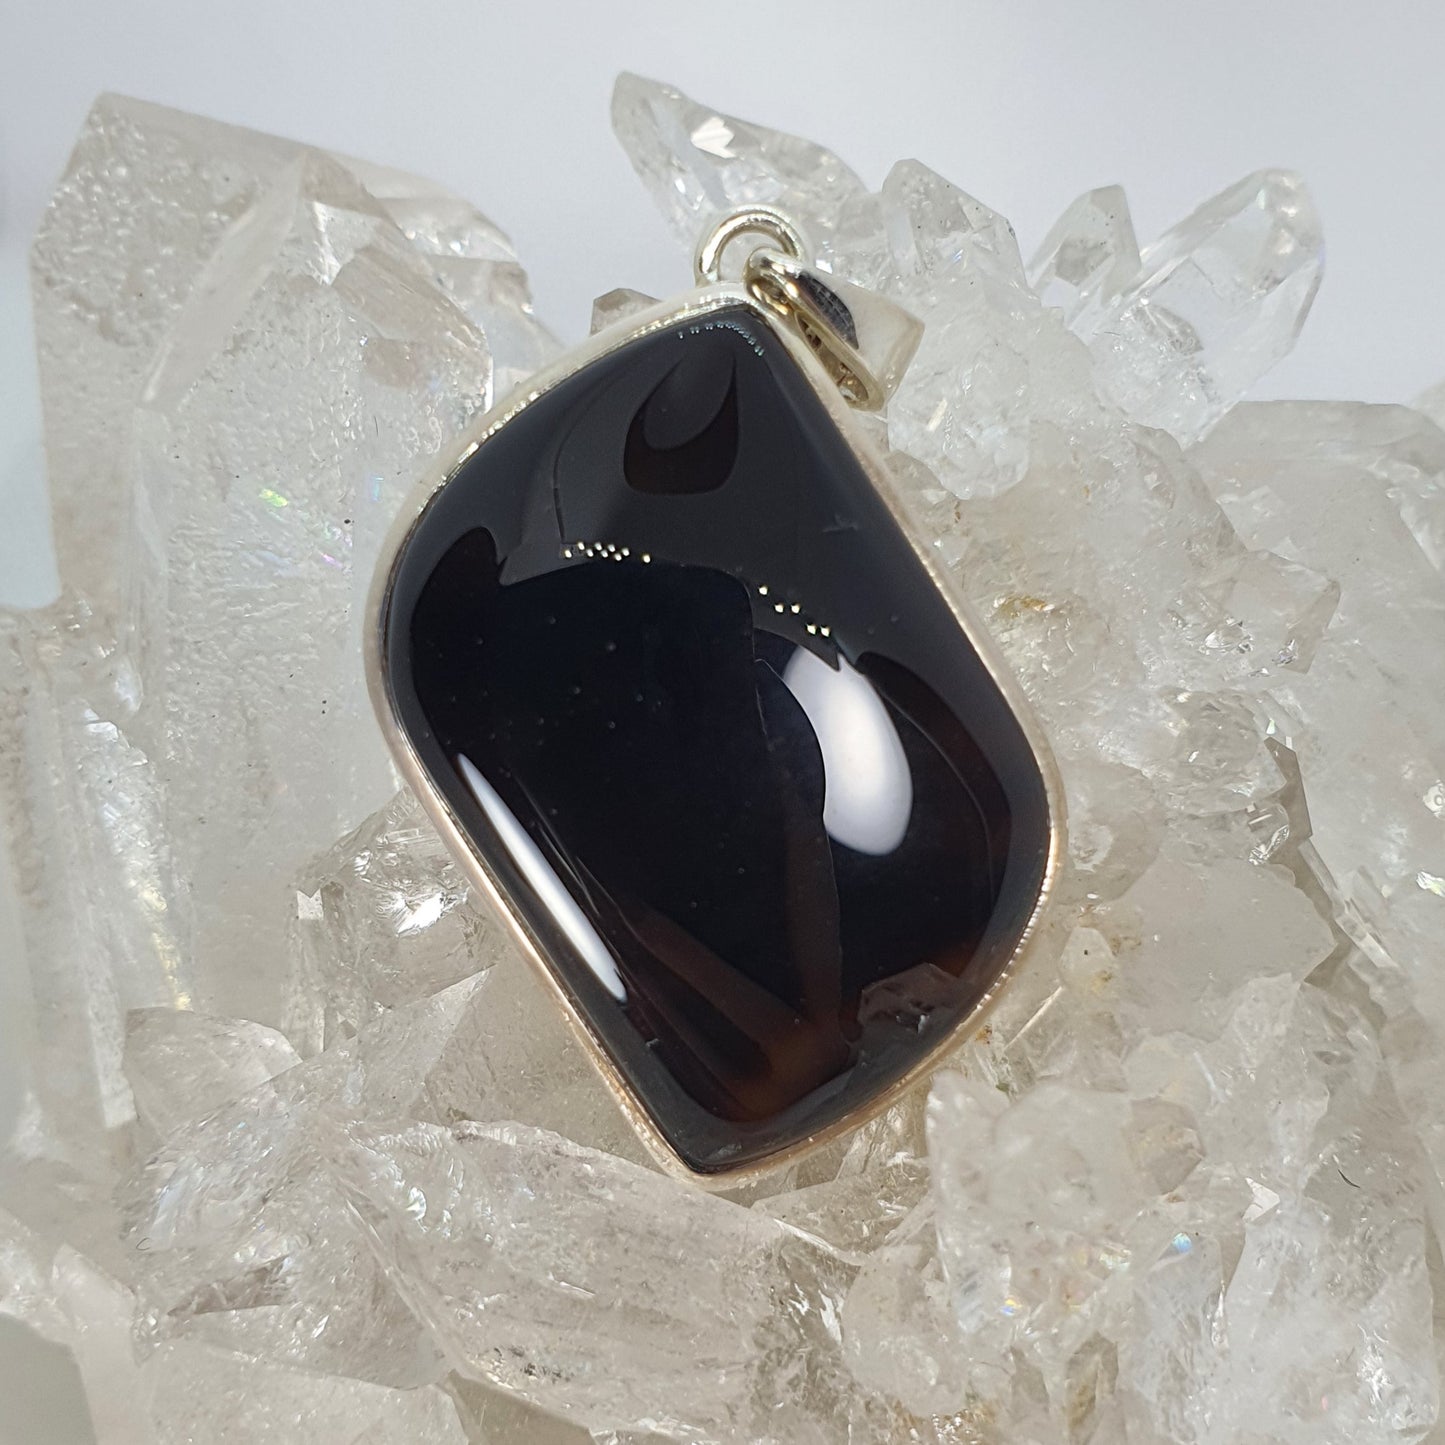 Crystals - Onyx Cabochon Pendant - Sterling Silver